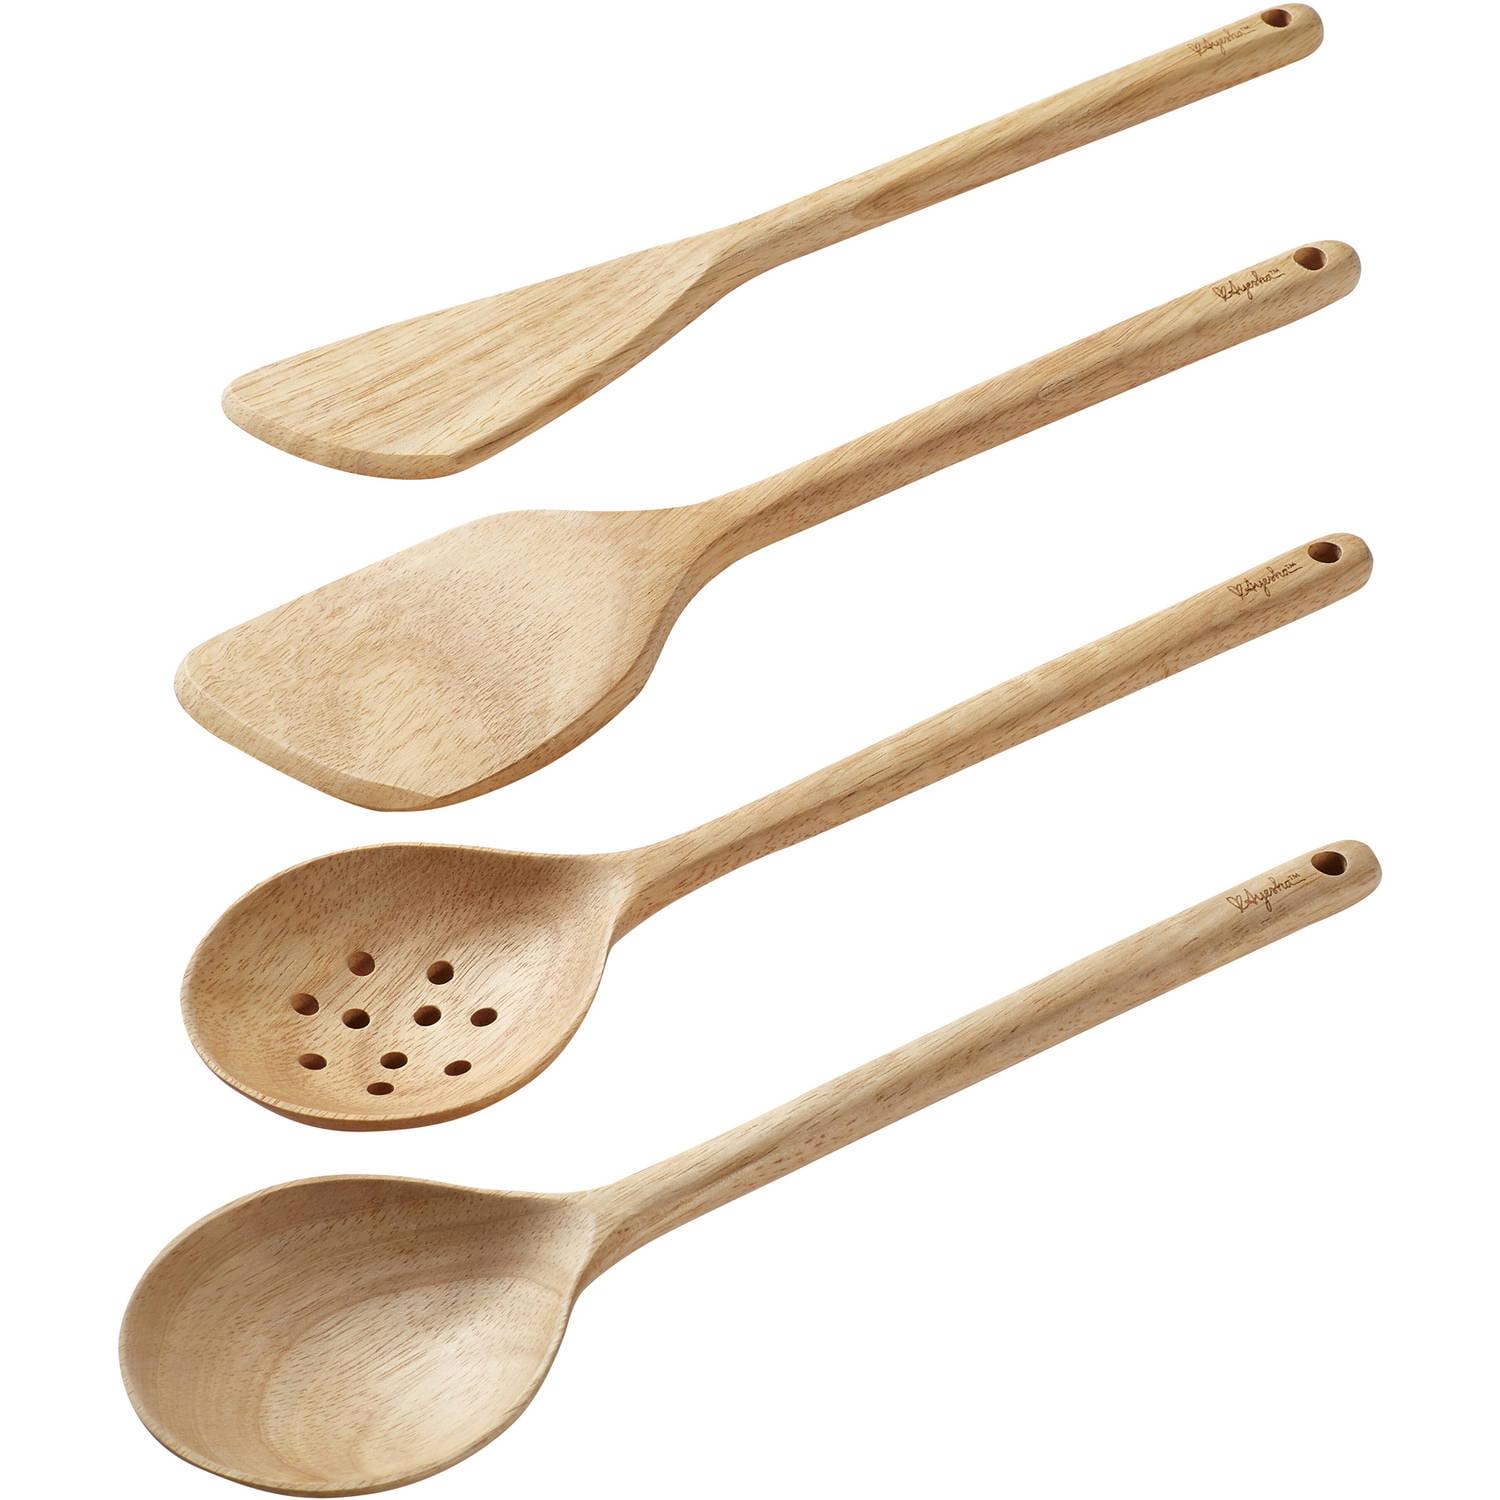 Wooden Spoons for Cooking, 8 PCS WOSPONFAN Kitchen Utensils Set, Wooden  Utensils for Cooking - Wooden Spoons, Spatula Set, Slotted Spoon, Handmade